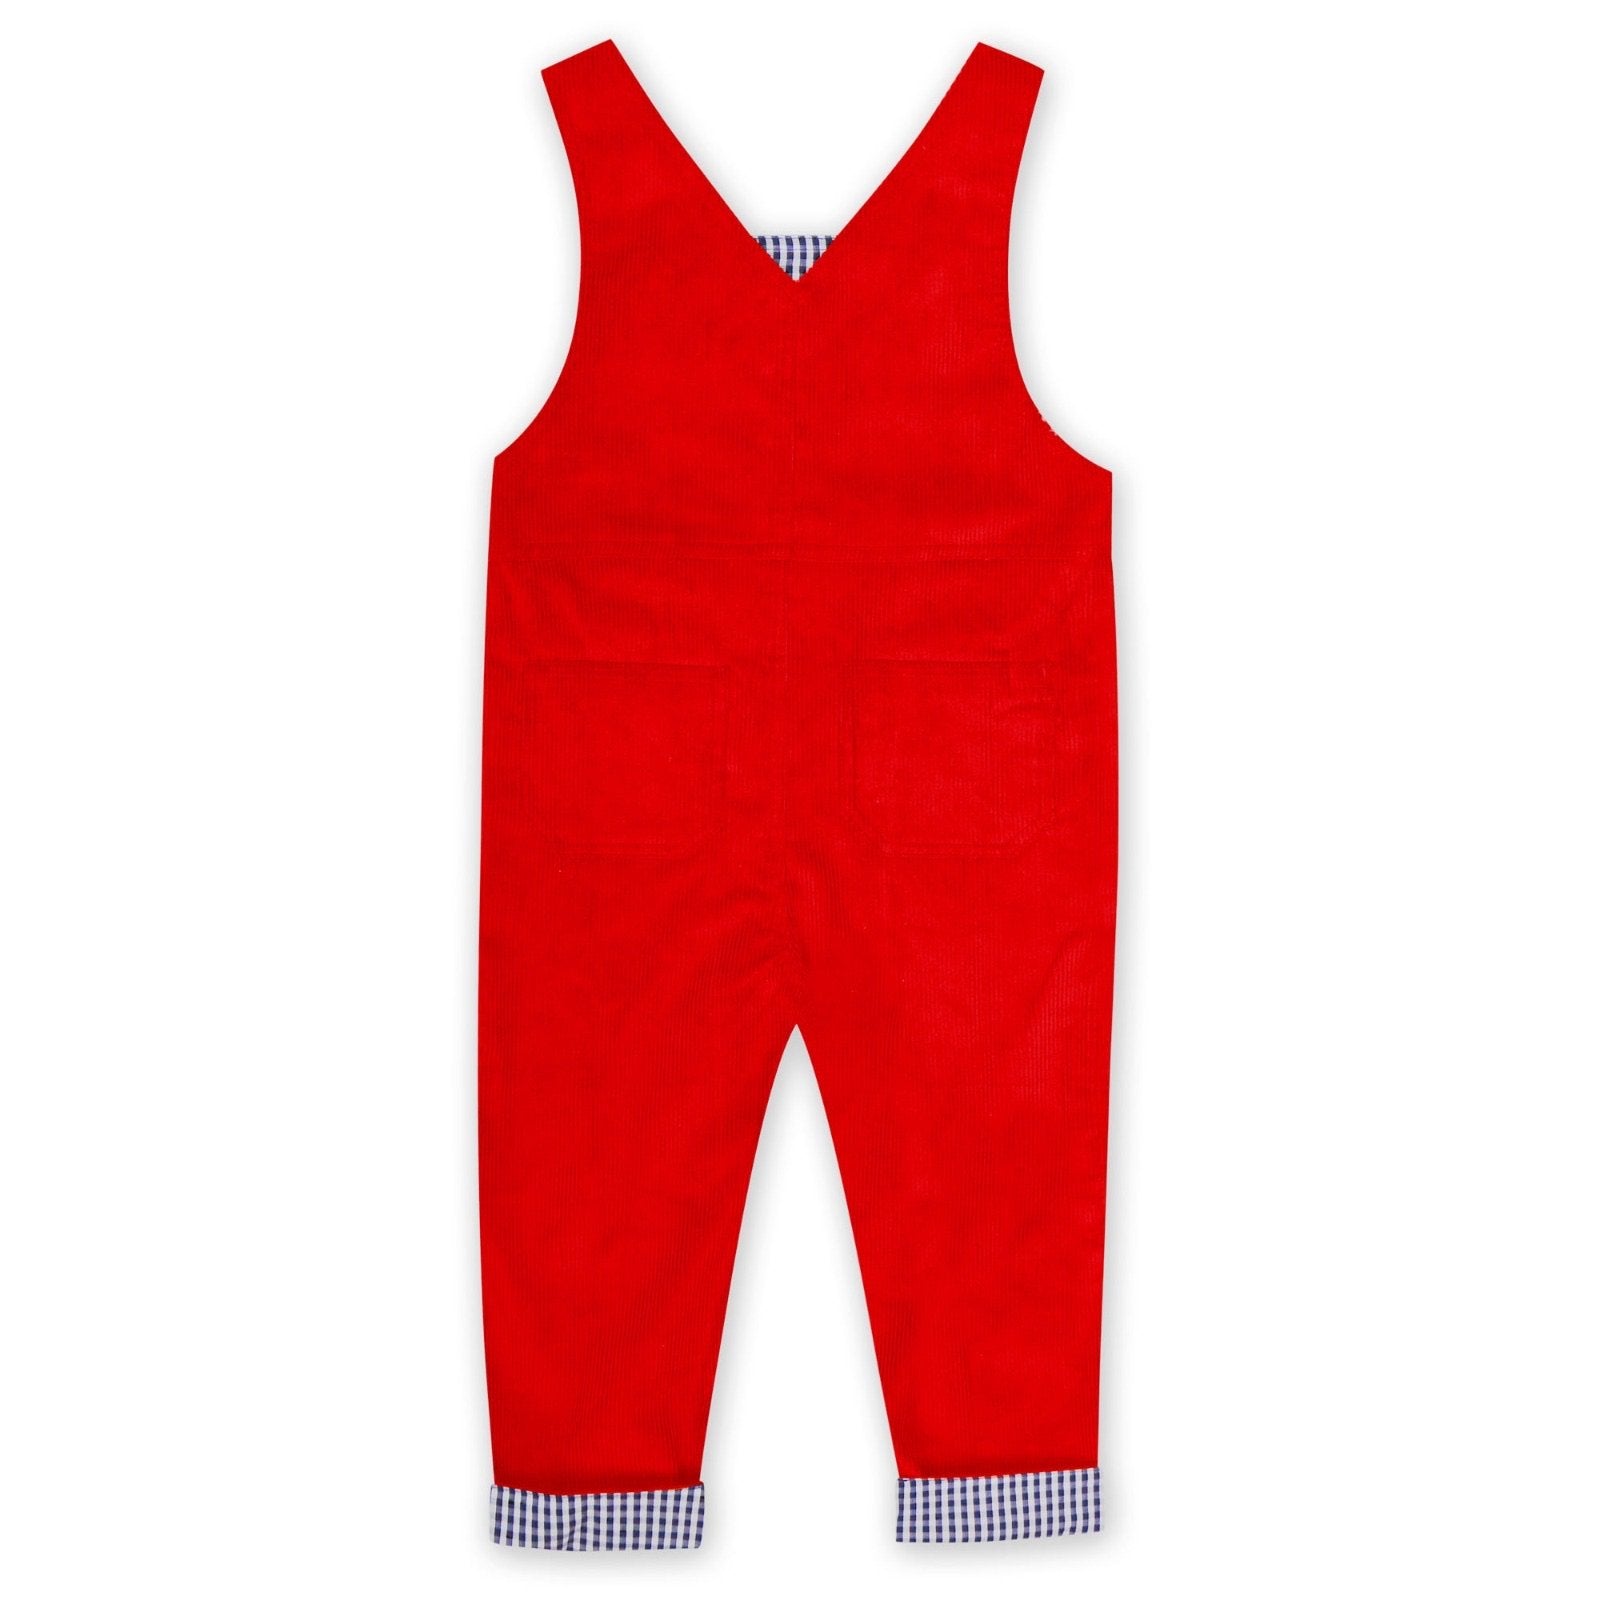 Corduroy Overalls In Red With Navy Birds - Cou Cou Baby